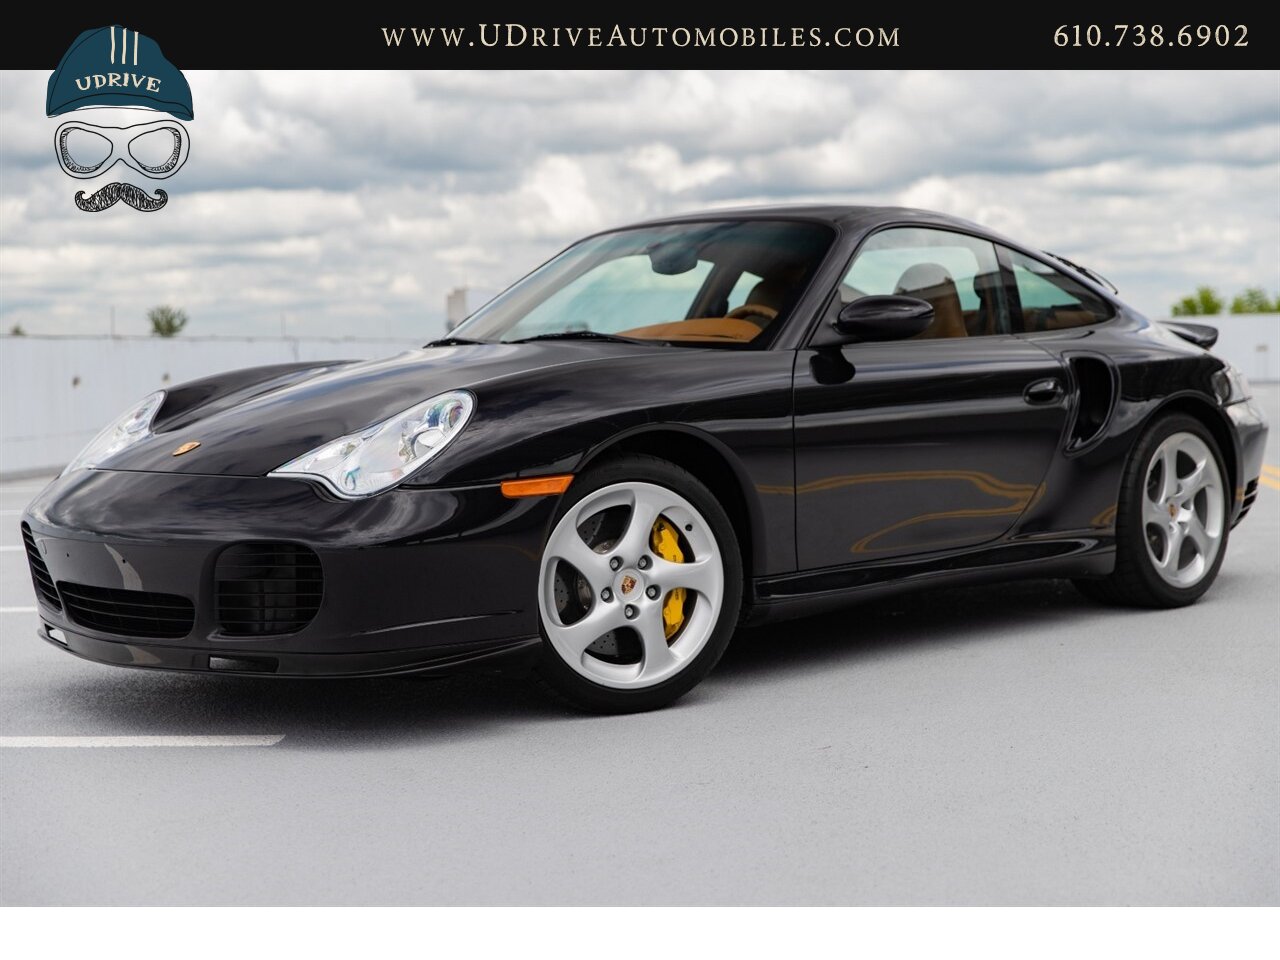 2005 Porsche 911 Turbo S 6 Speed 14k Miles Sport Sts Painted Backs  Natural Brown Lthr $144,070 MSRP - Photo 1 - West Chester, PA 19382